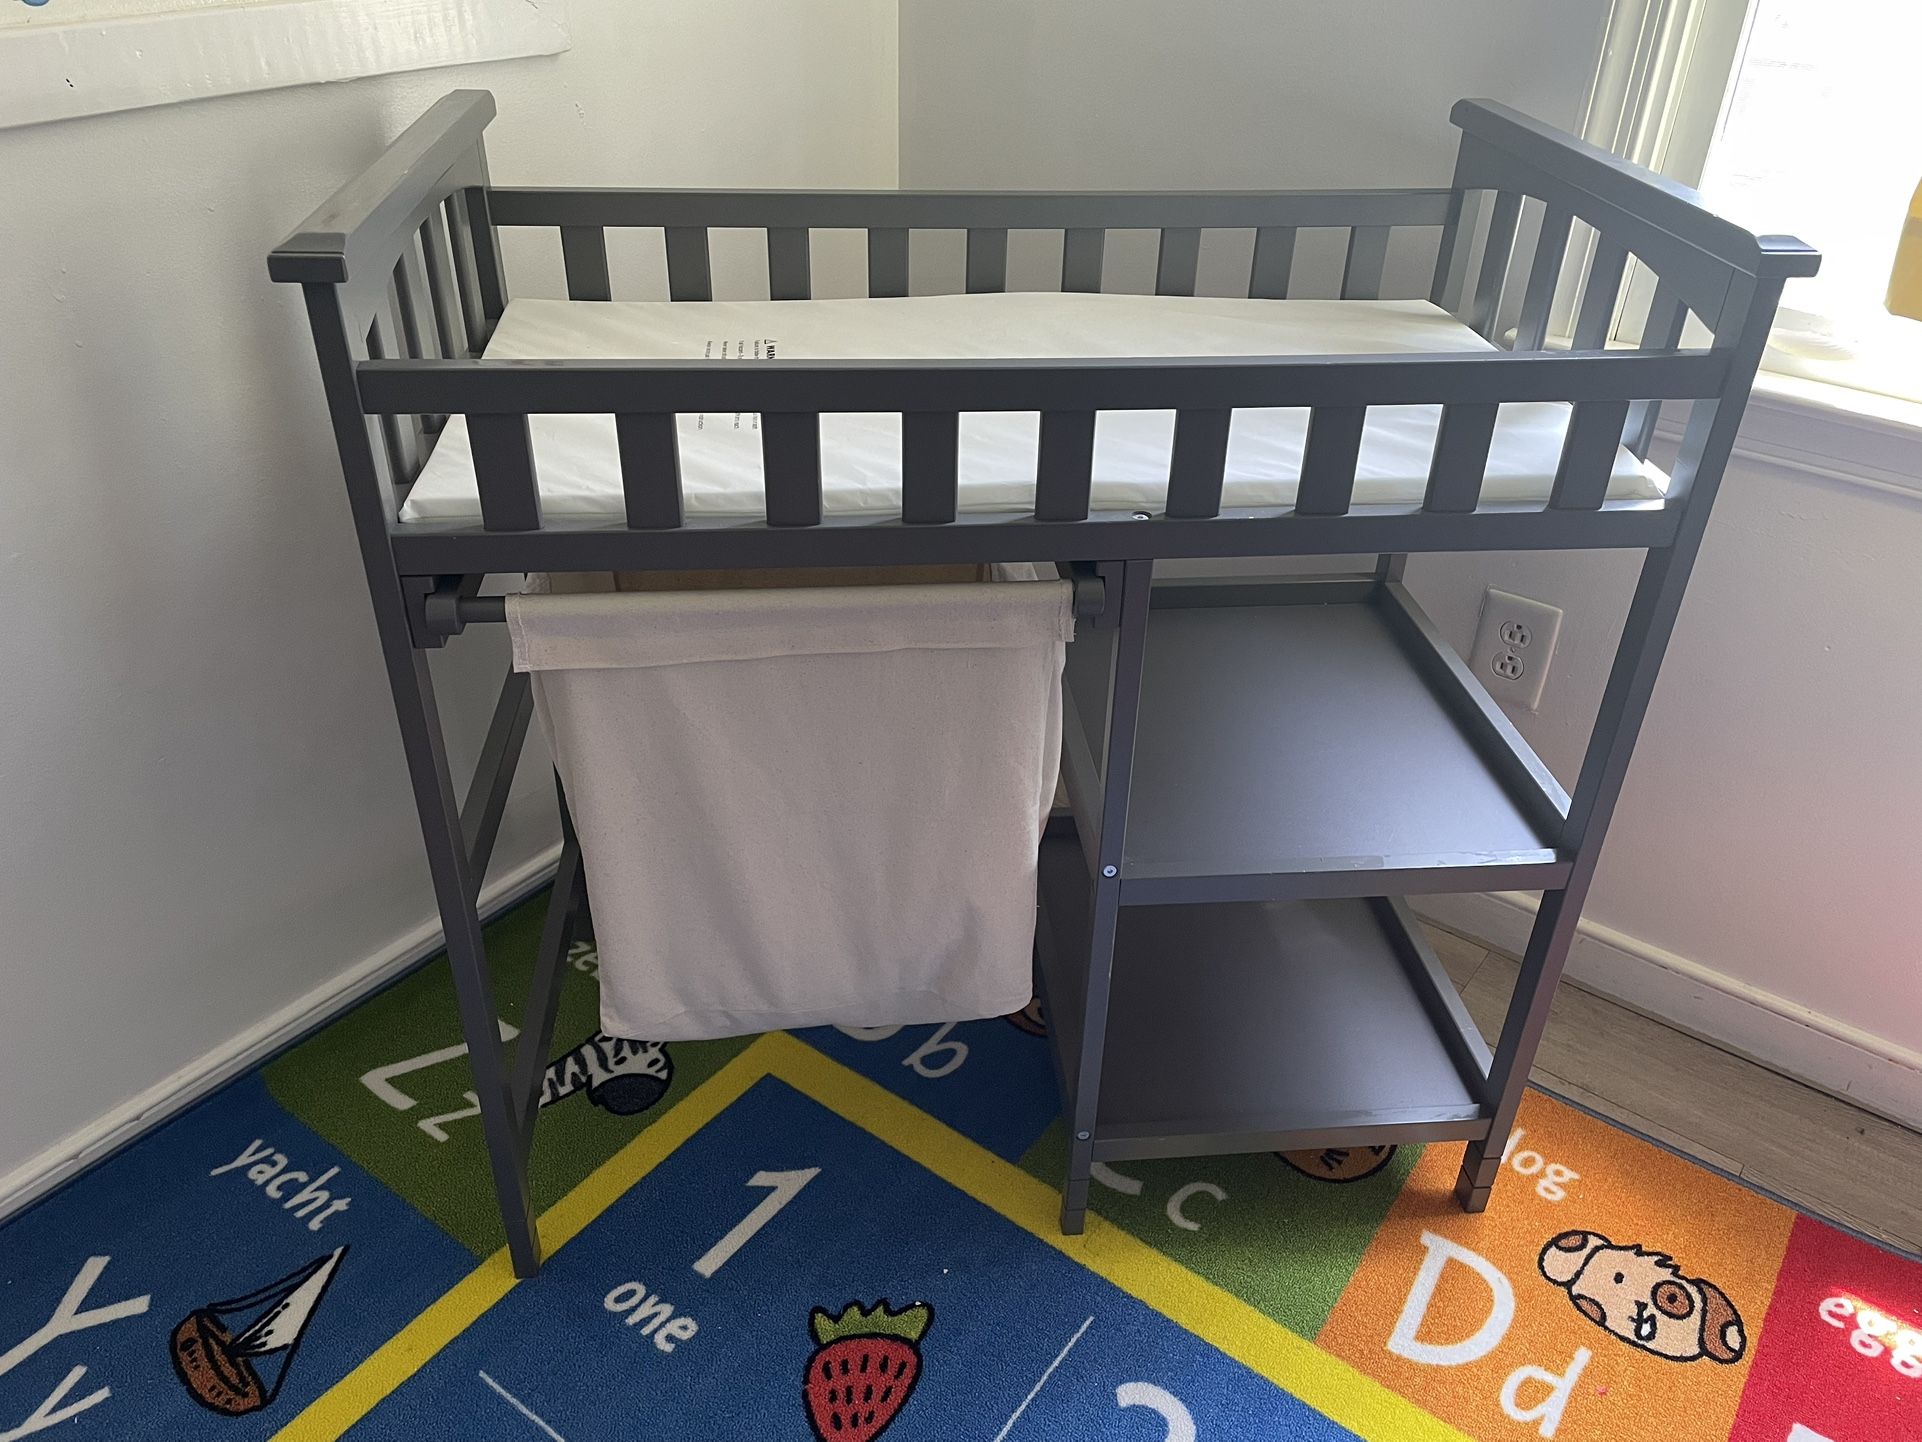 Grey Changing Table And Crib/toddler Bed With Mattress 